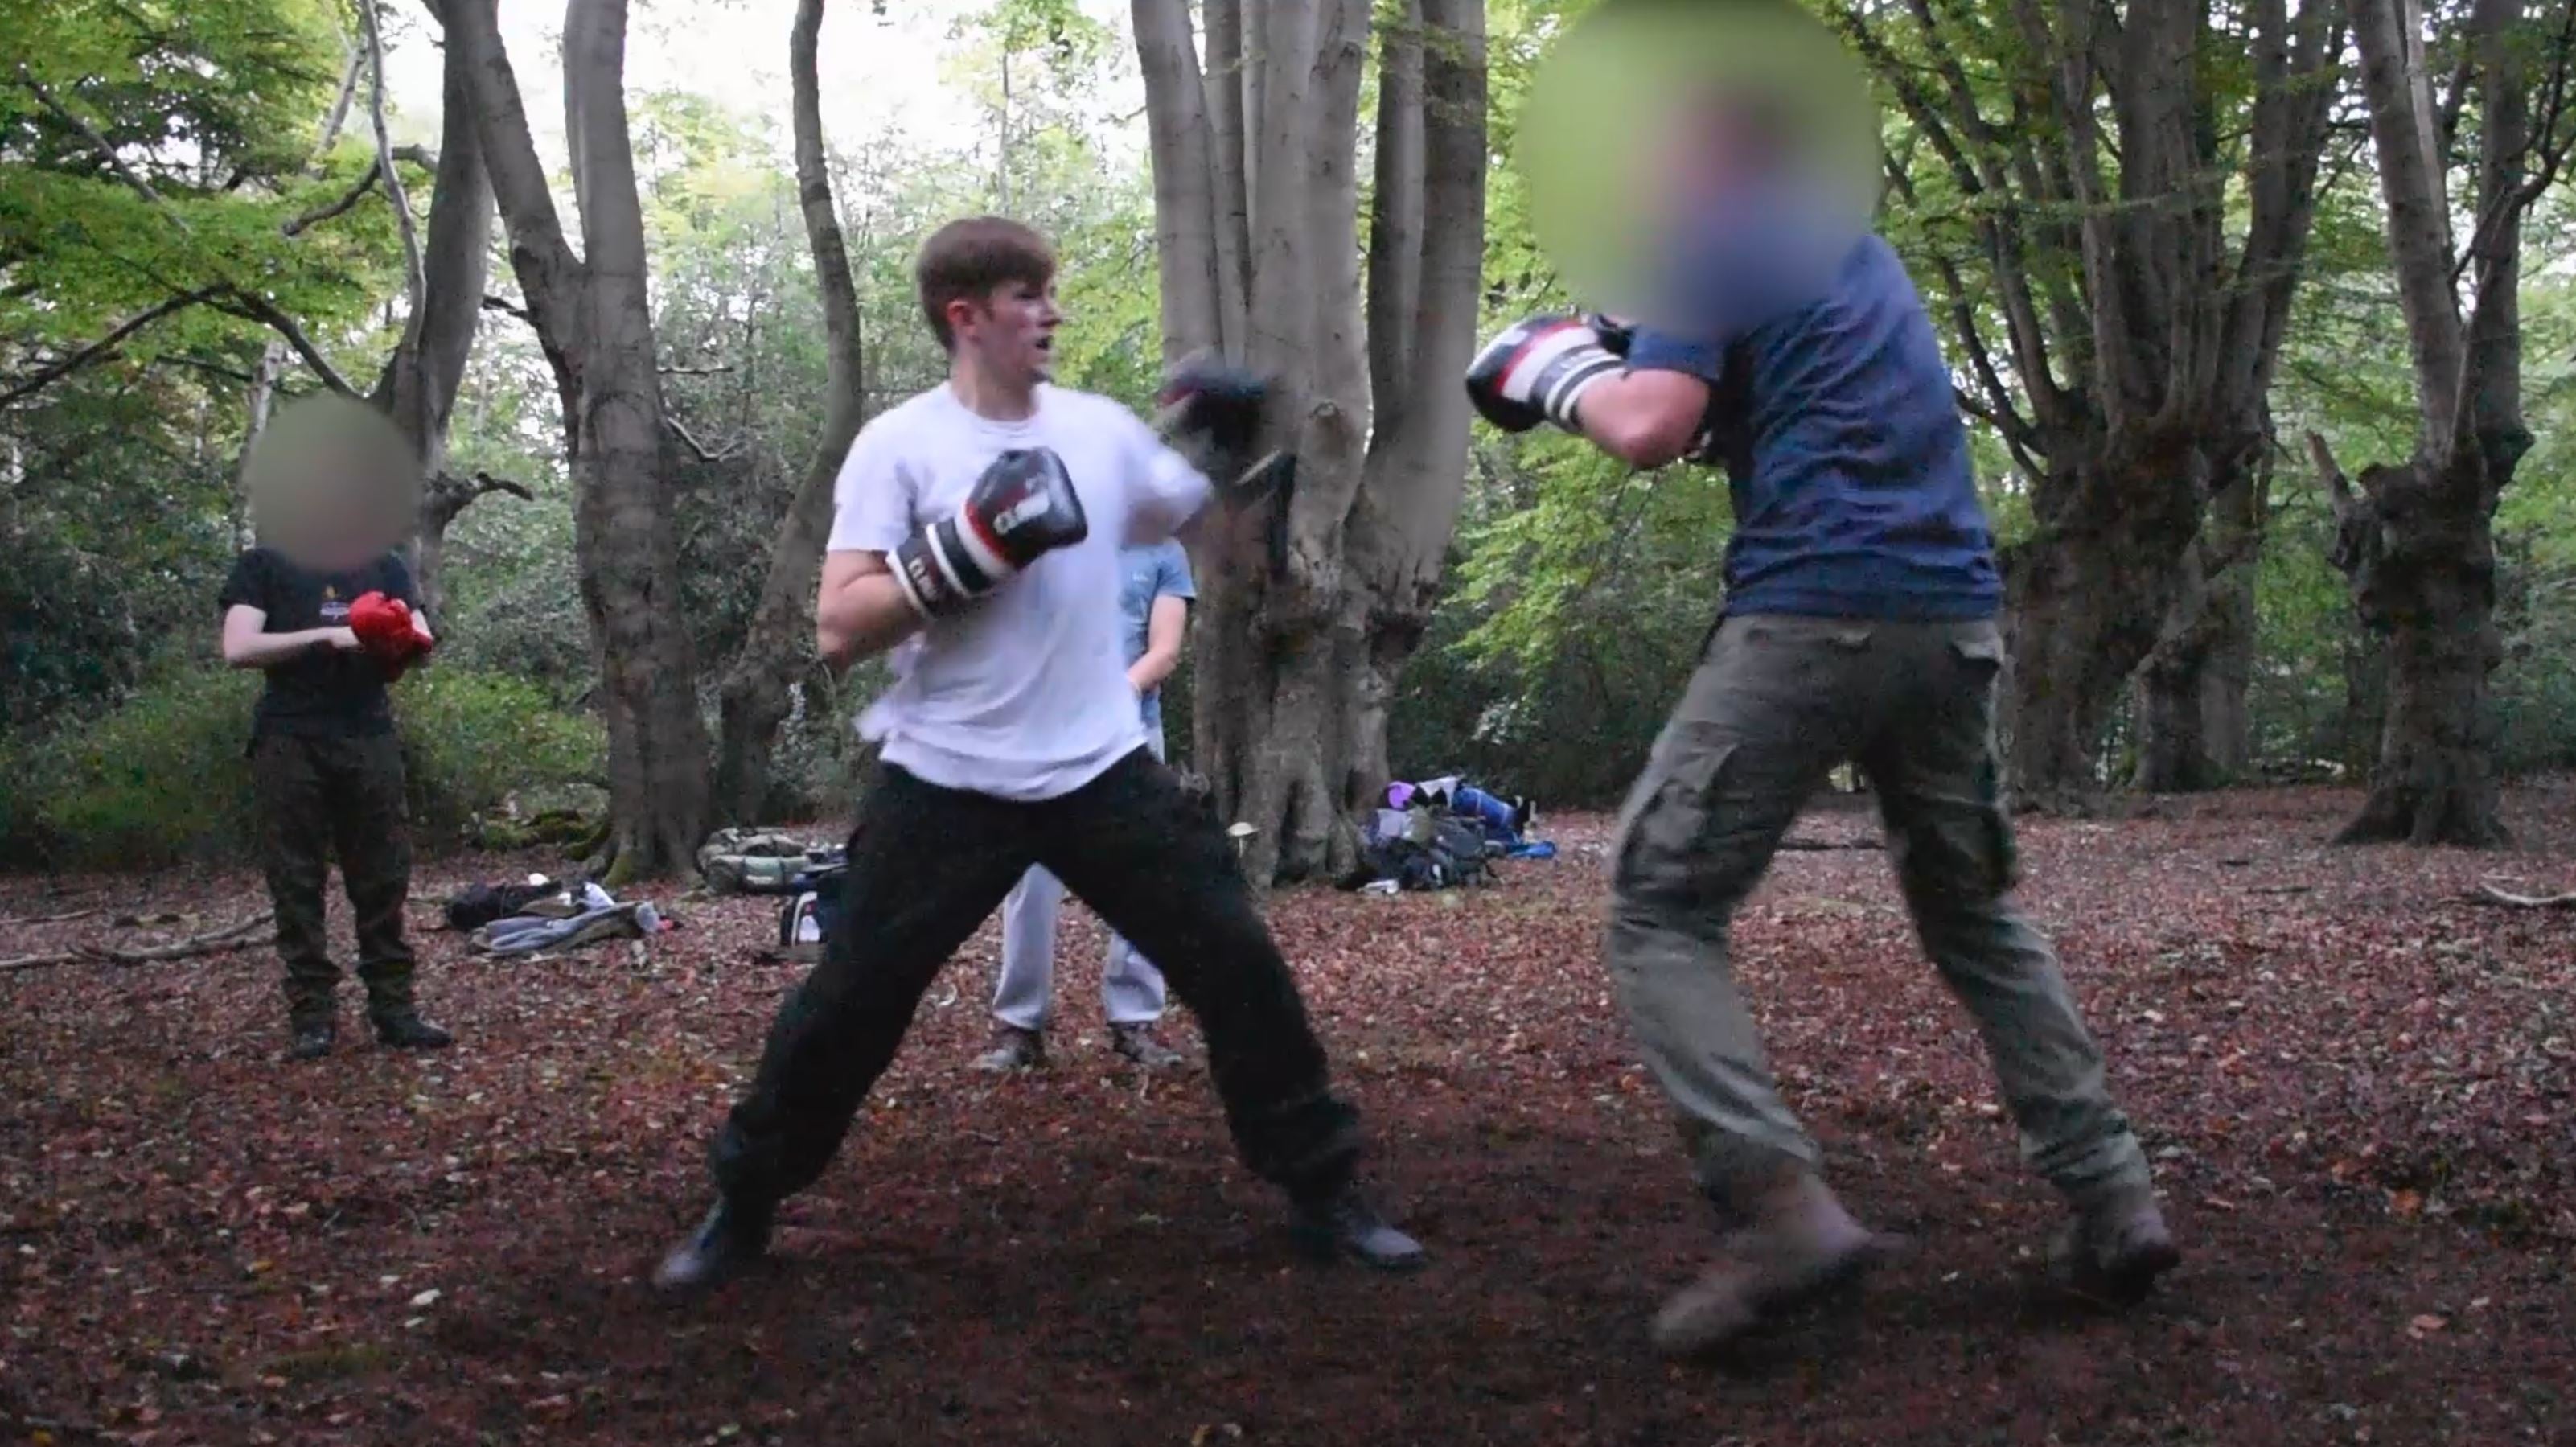 Benjamin Hannam, pictured here boxing outdoors, is the first police officer to be convicted of belonging to a banned neo-Nazi terror group